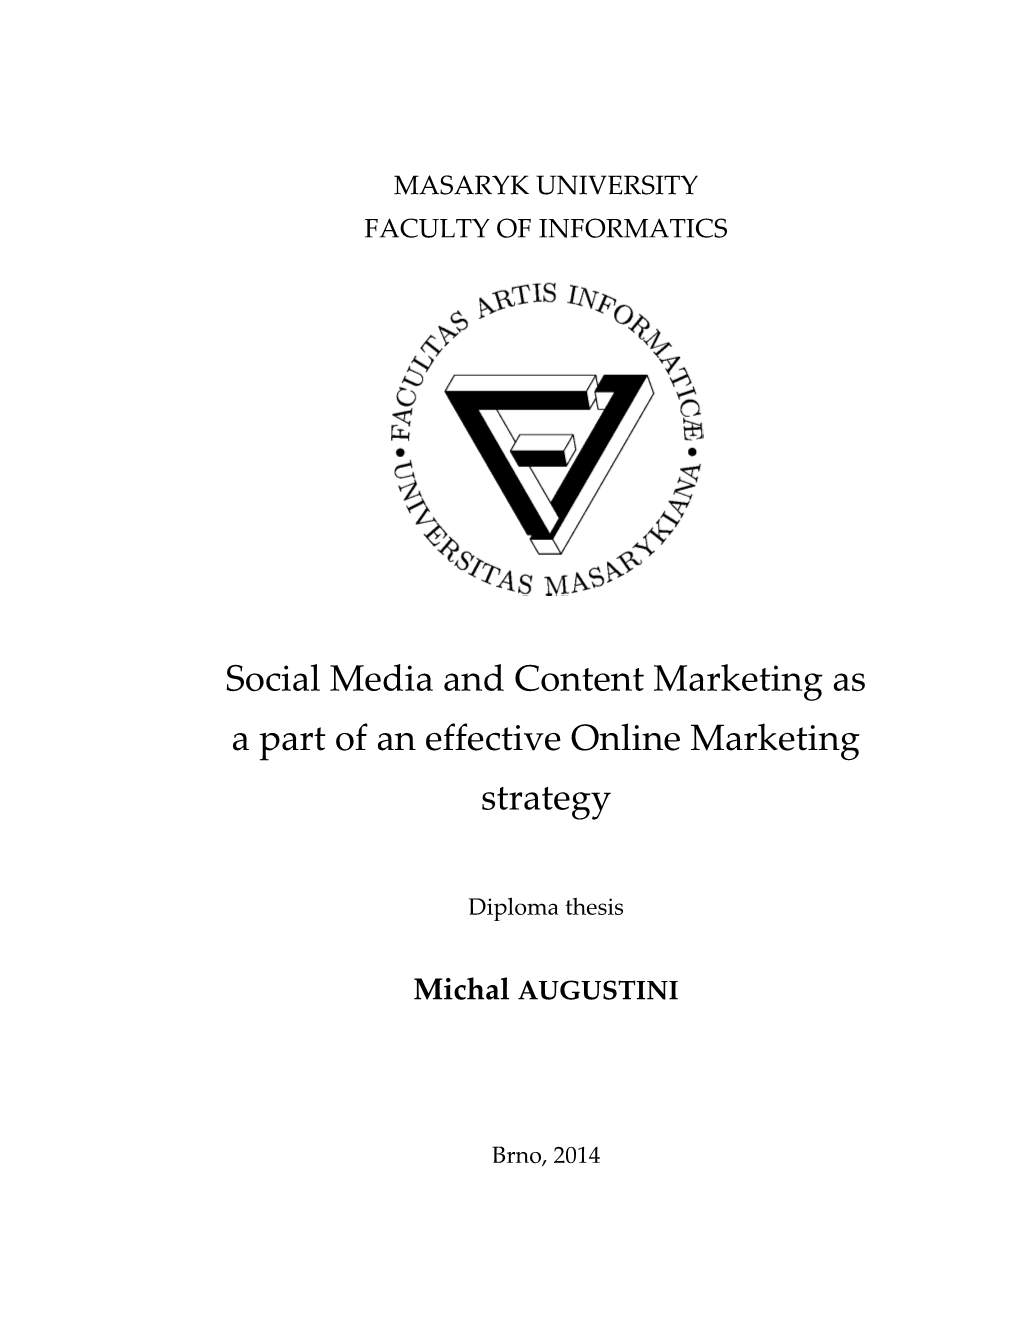 Social Media and Content Marketing As a Part of an Effective Online Marketing Strategy